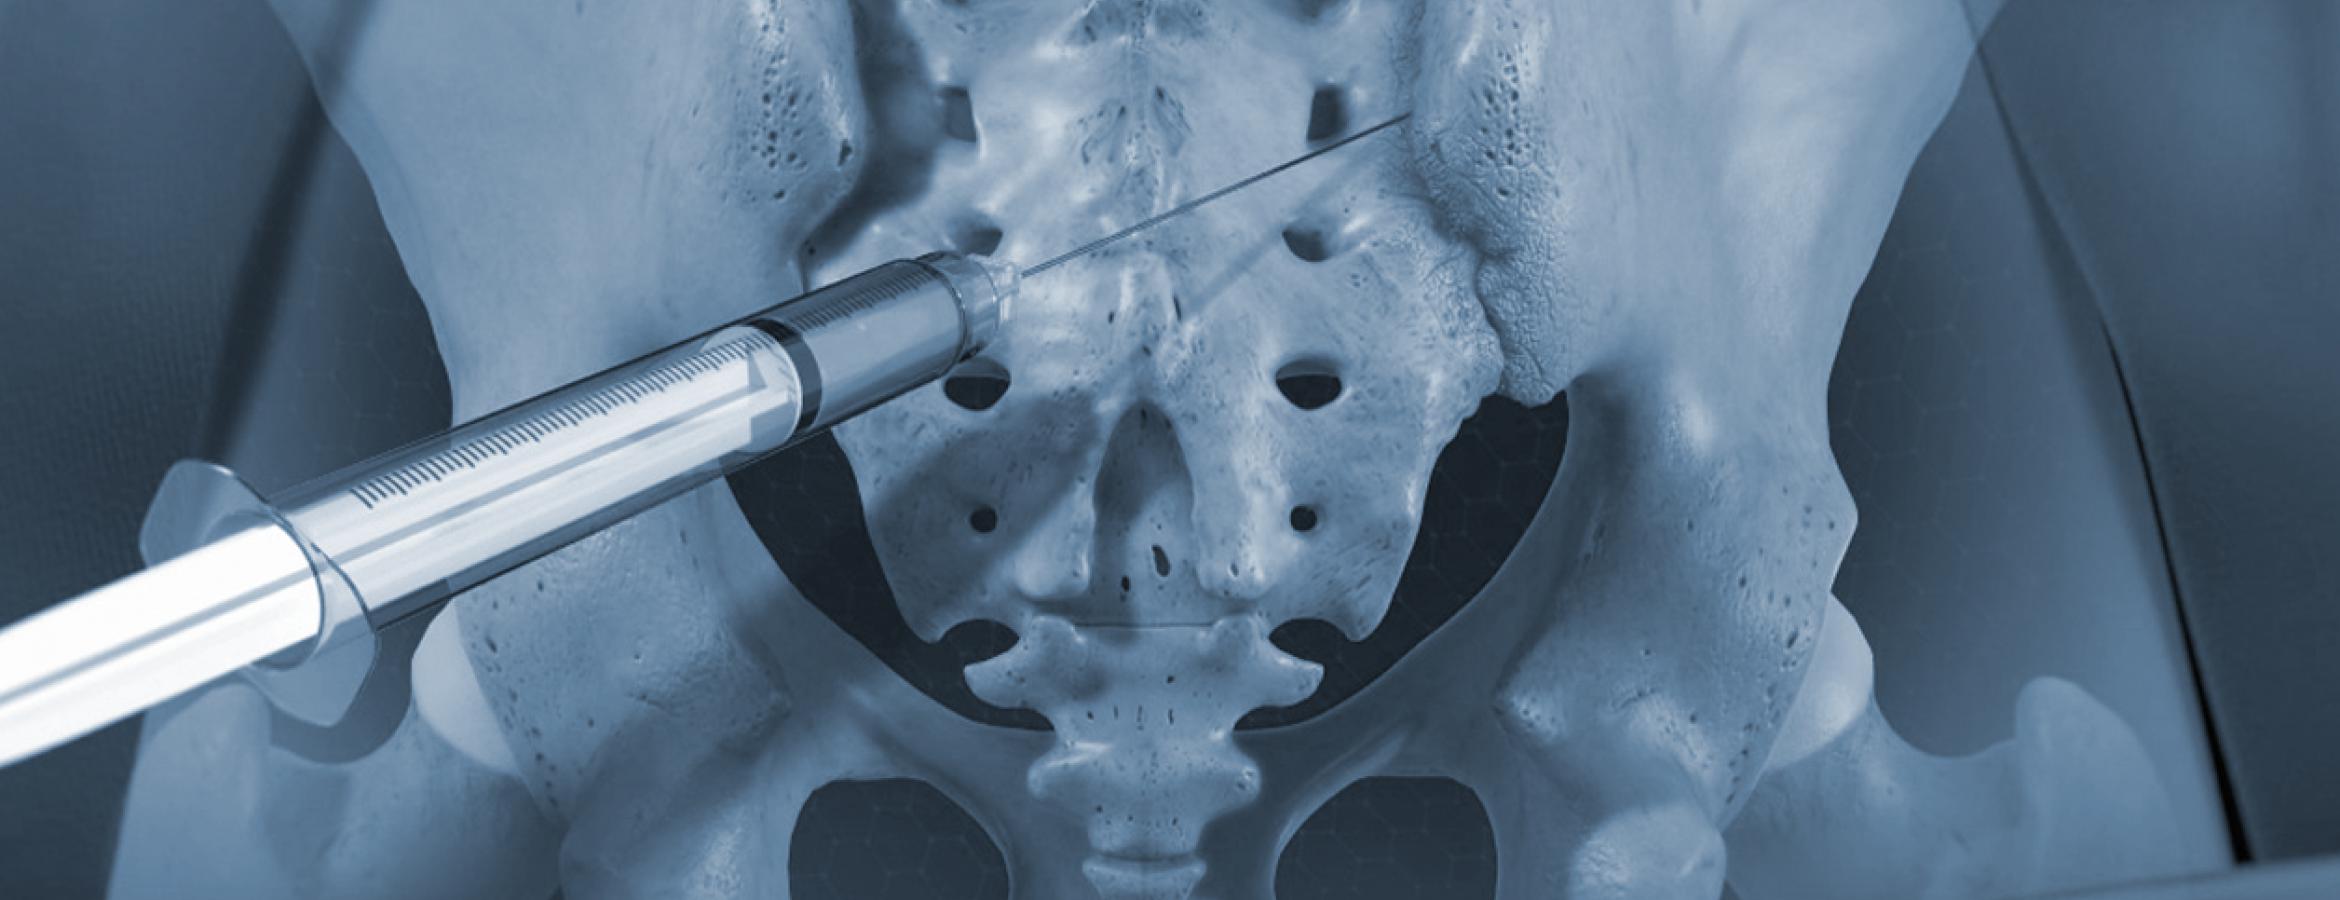 Sacroiliac (SI) Joint Injection